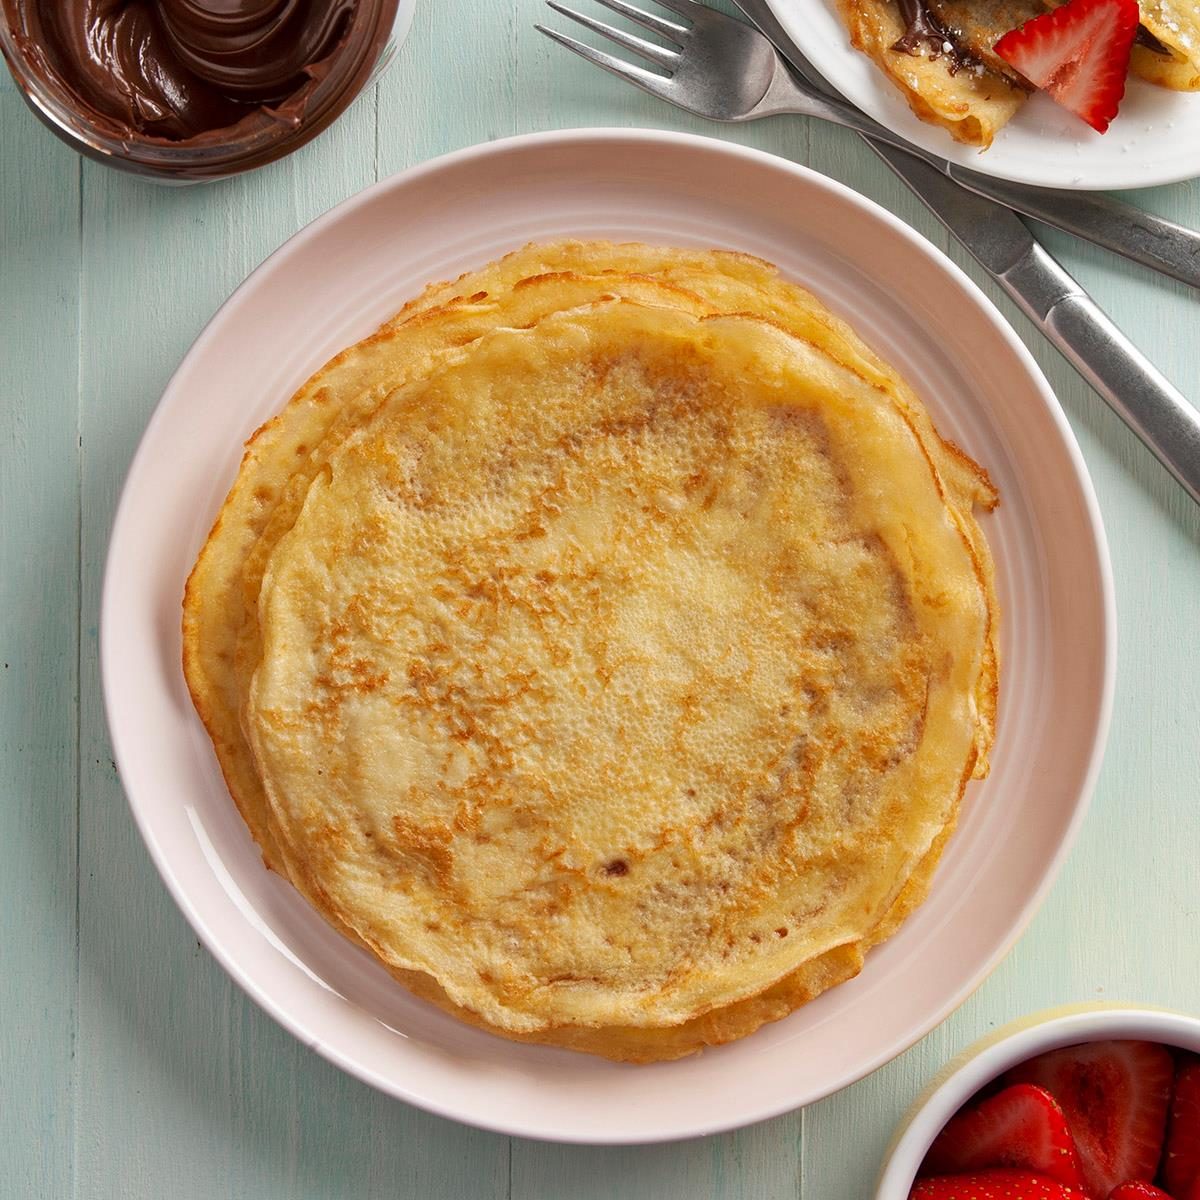 Basic Crepes Recipe: How to Make It